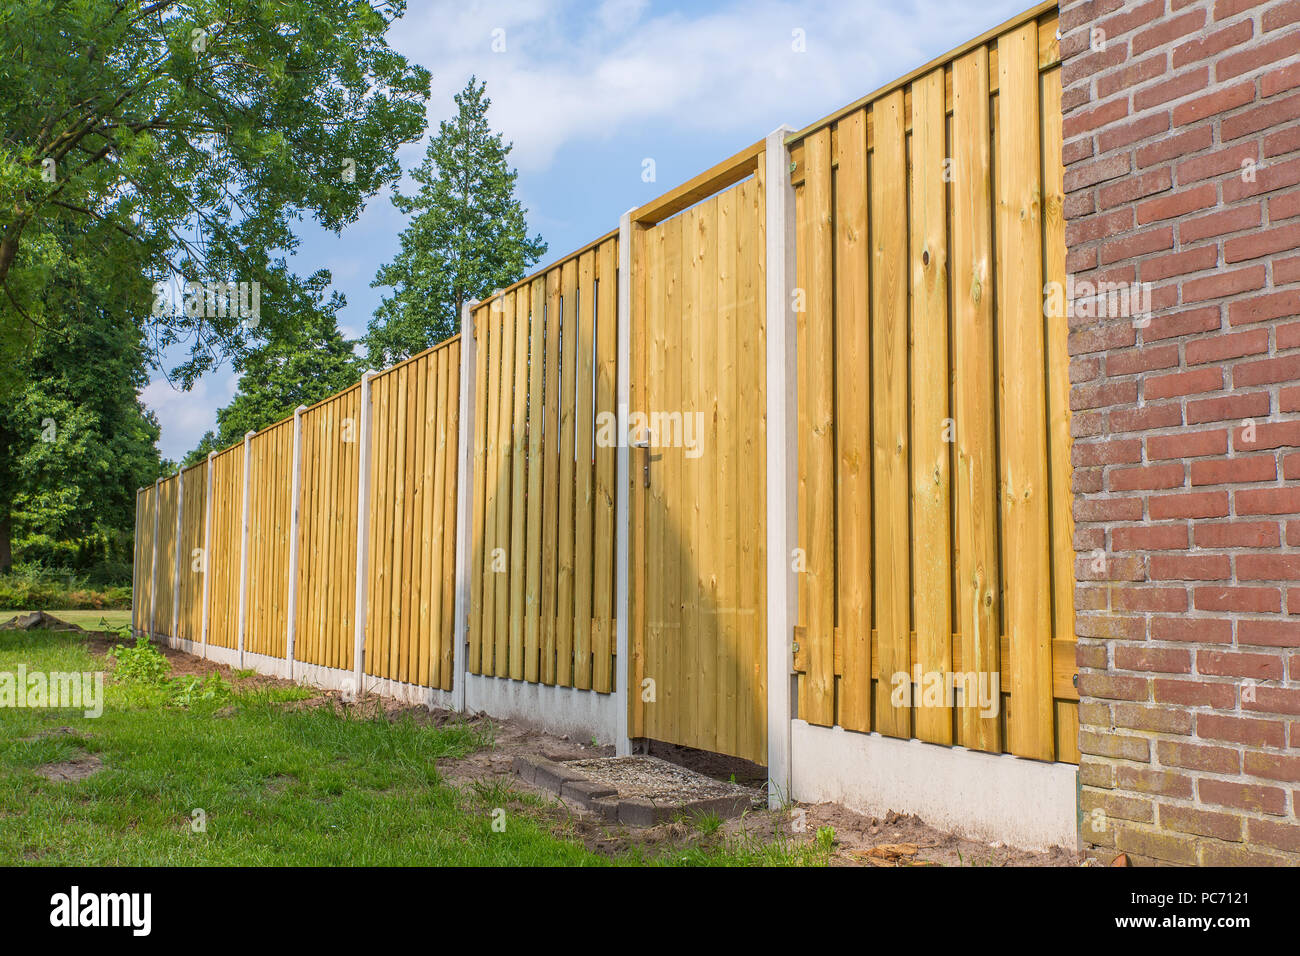 New wooden fence construction with stone wall and trees Stock Photo